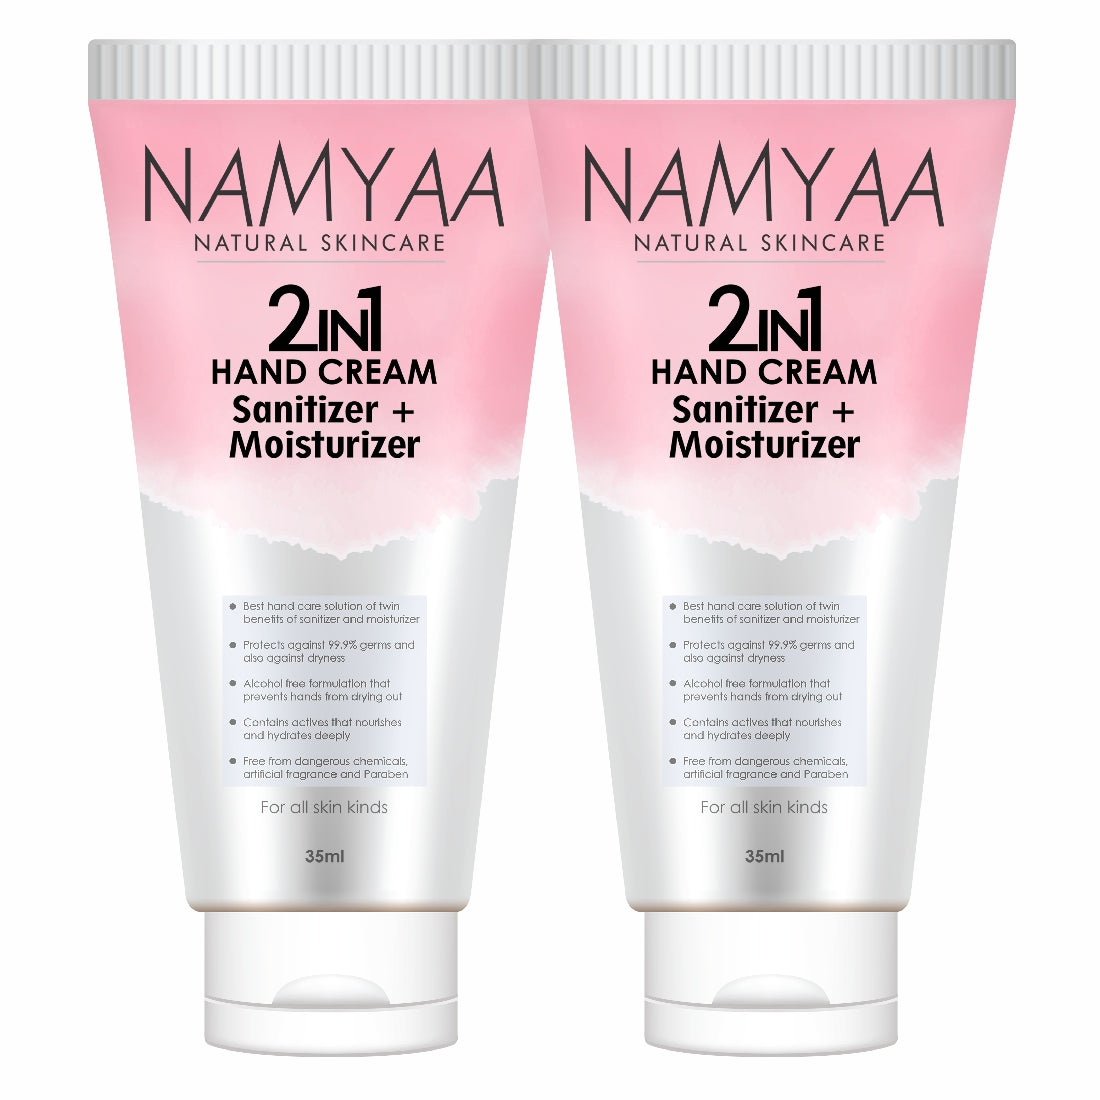 How to Get rid of unwanted hair | Namyaa hair removal cream review - YouTube